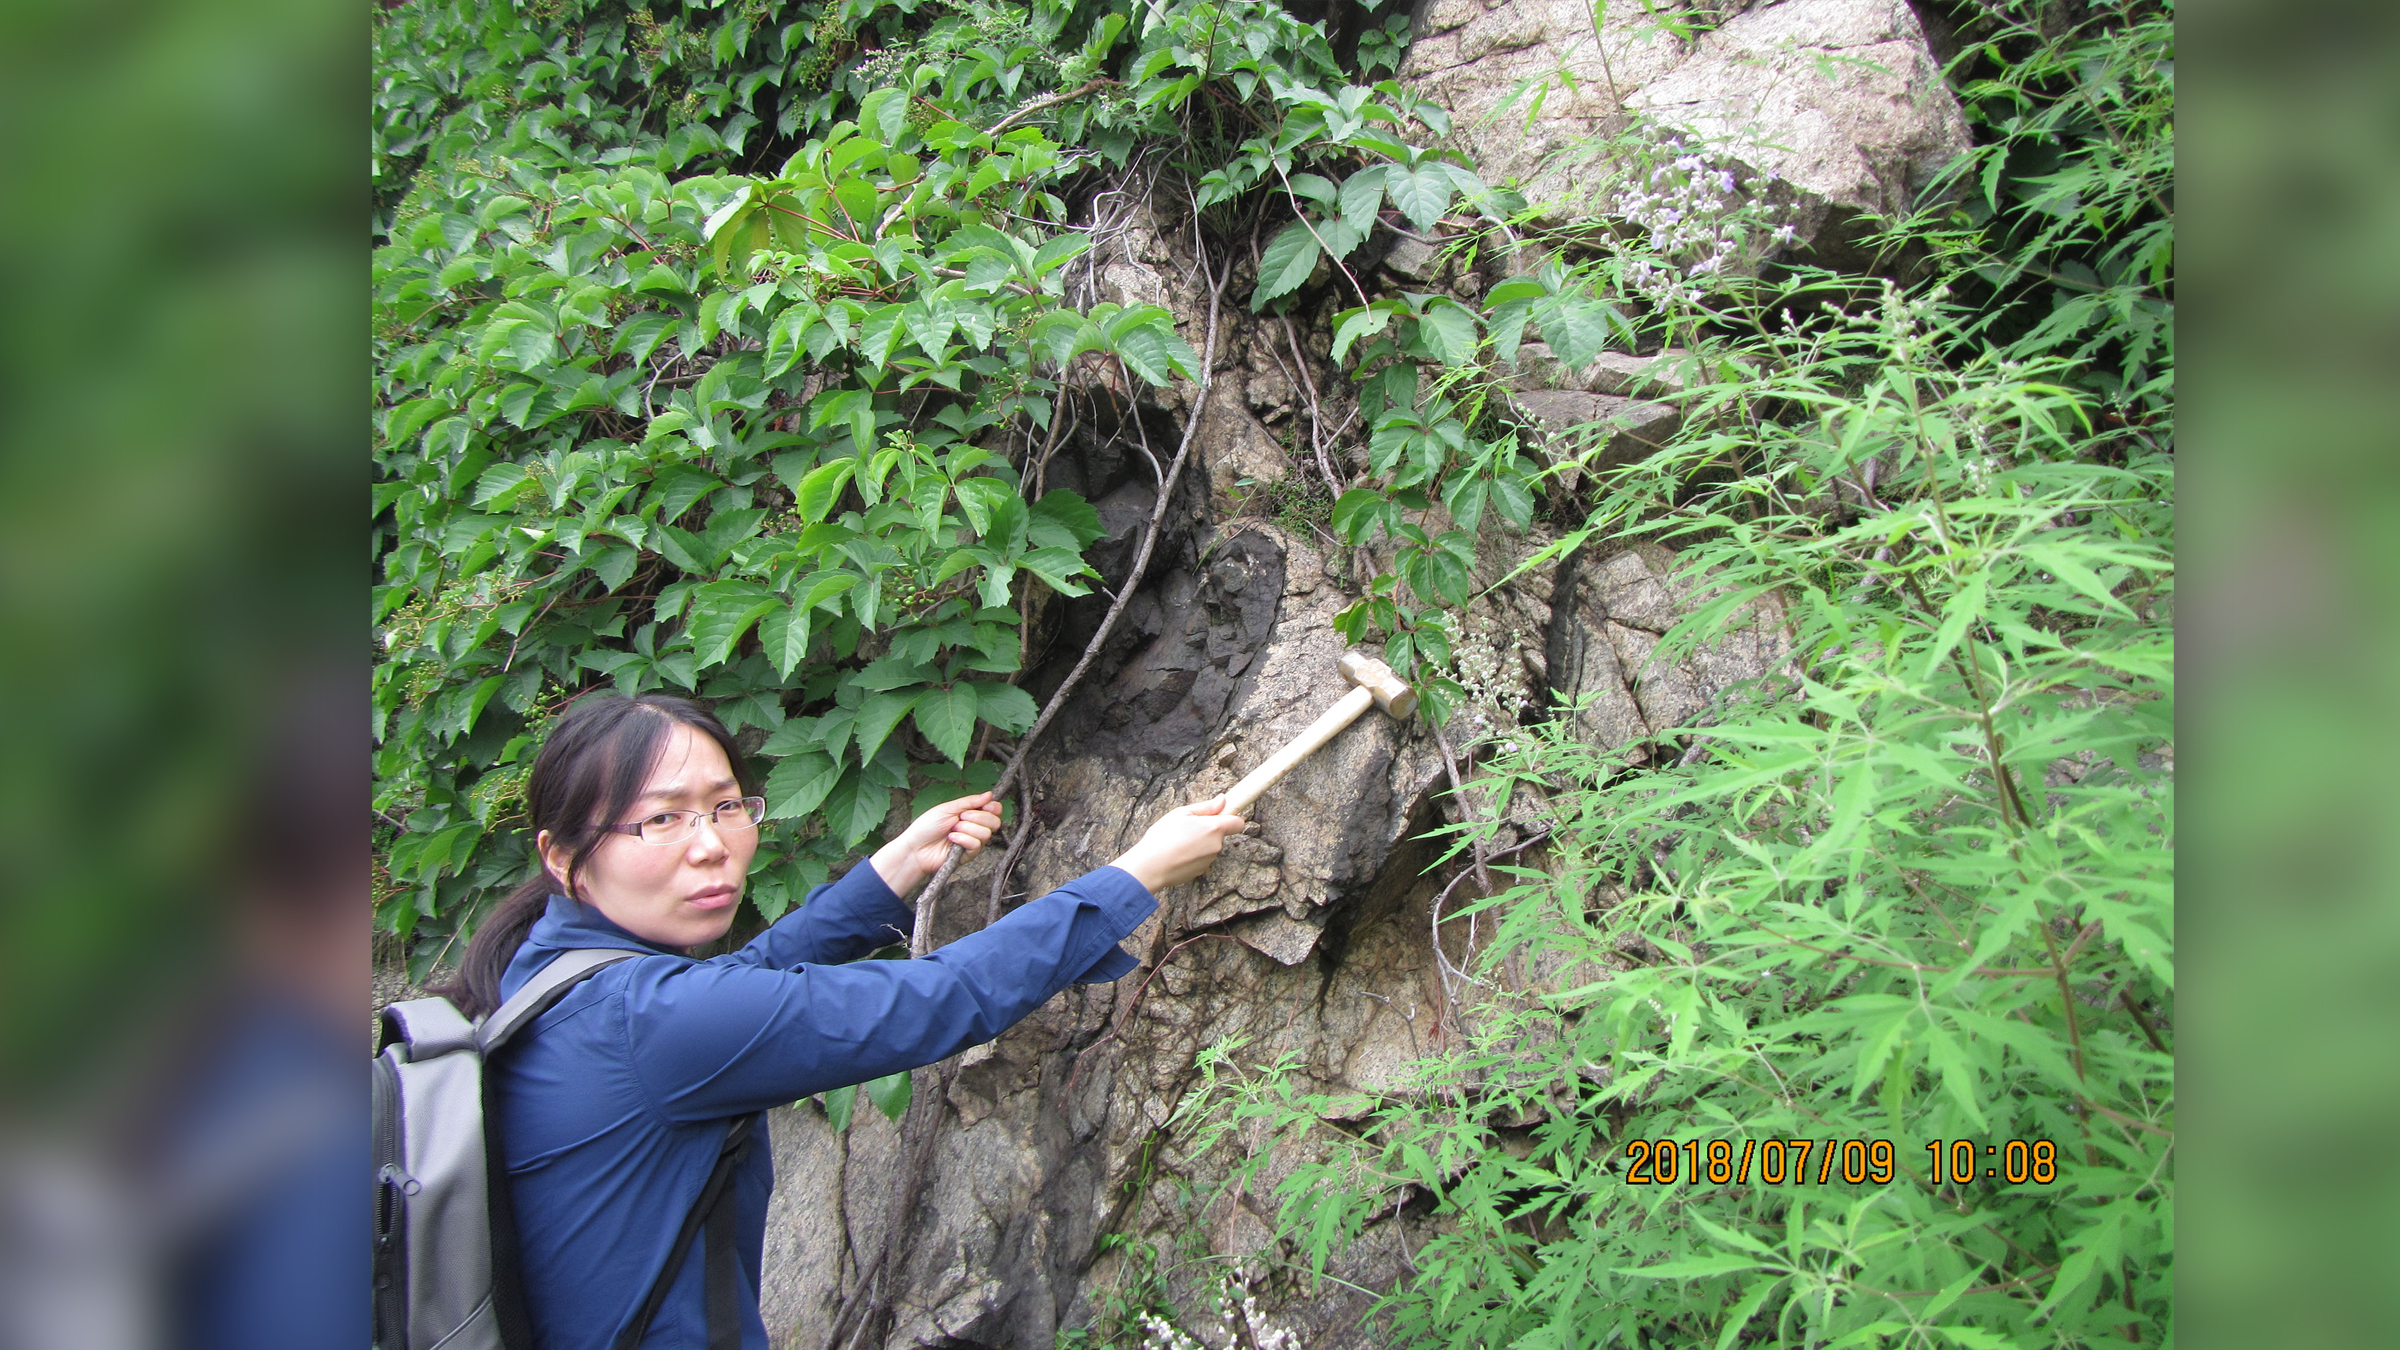 Lu Wang uncovers dense brush at the site of Archean eclogite at Shangying, China.